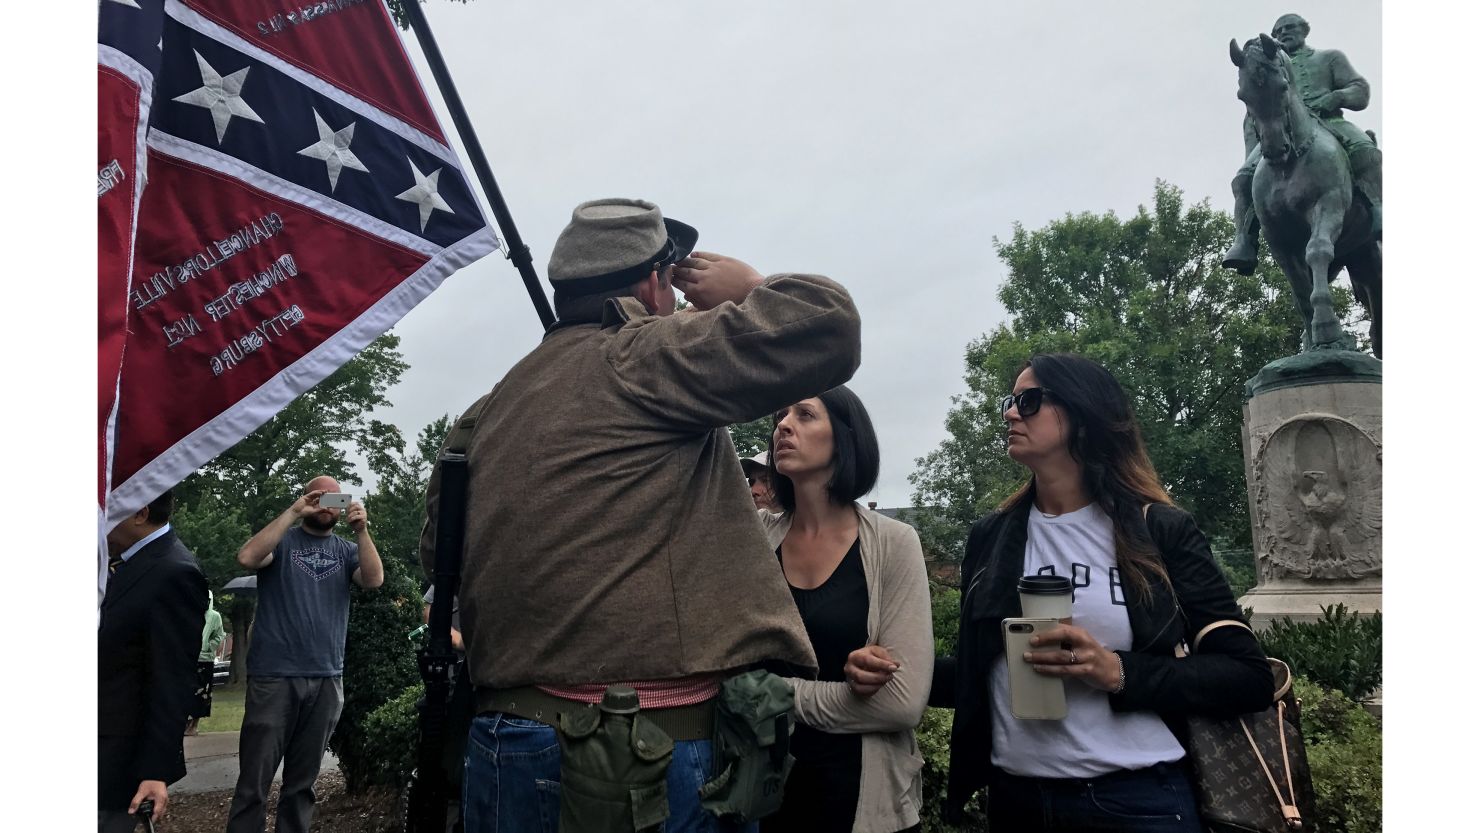 Allen Armentrout salutes a statue of Confederate Gen. Robert E. Lee in Charlottesville, Virginia, on Tuesday. Armentrout was confronted by residents.